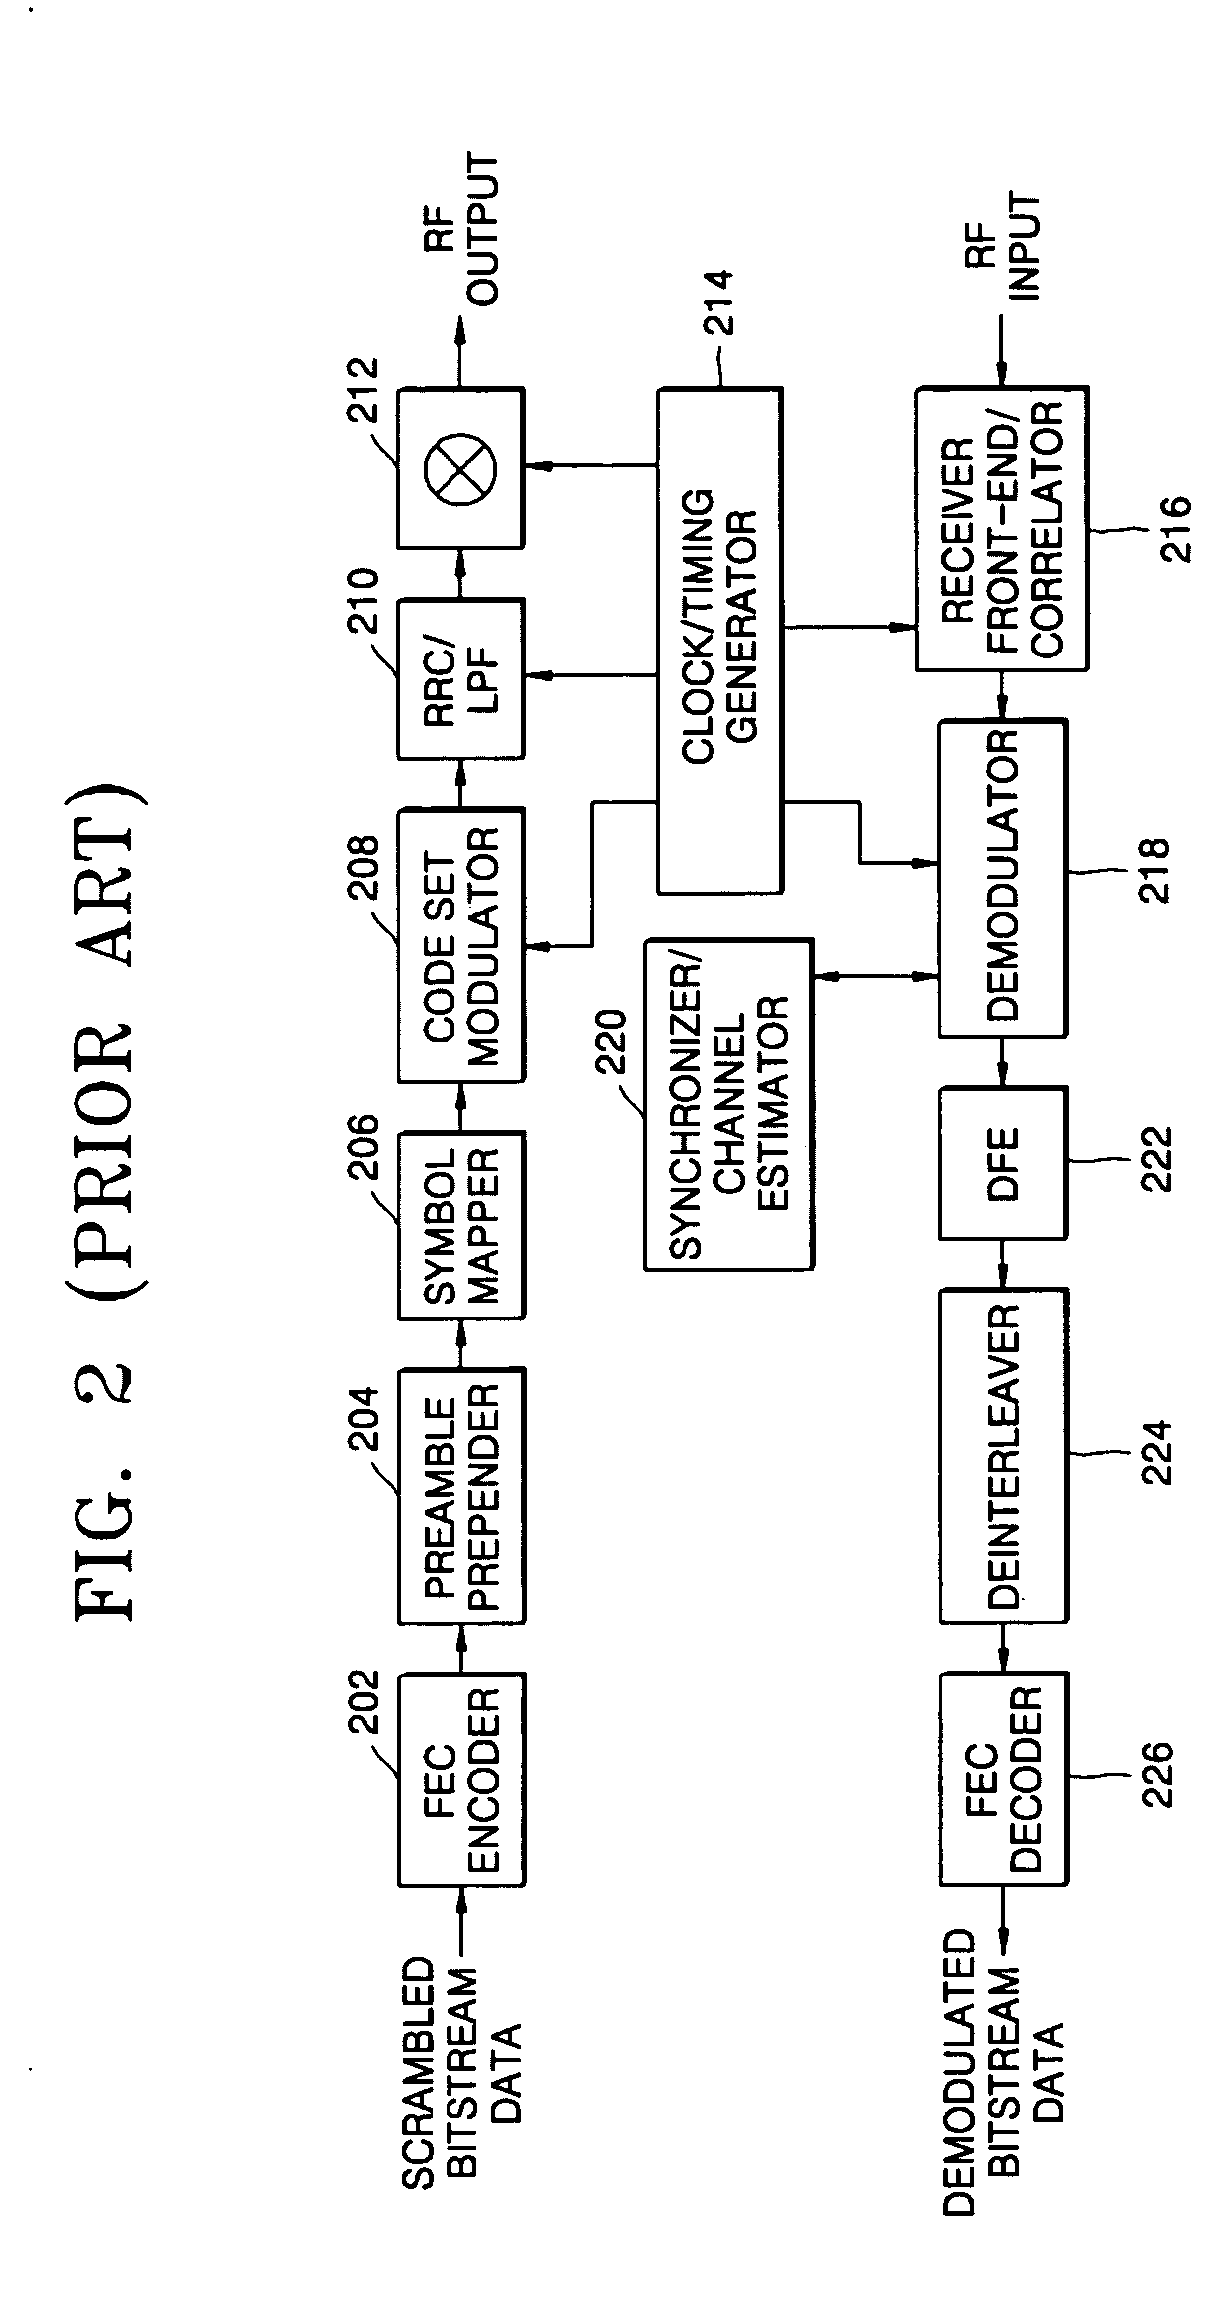 Pulse signal generator for ultra-wideband radio transception and radio transceiver having the same